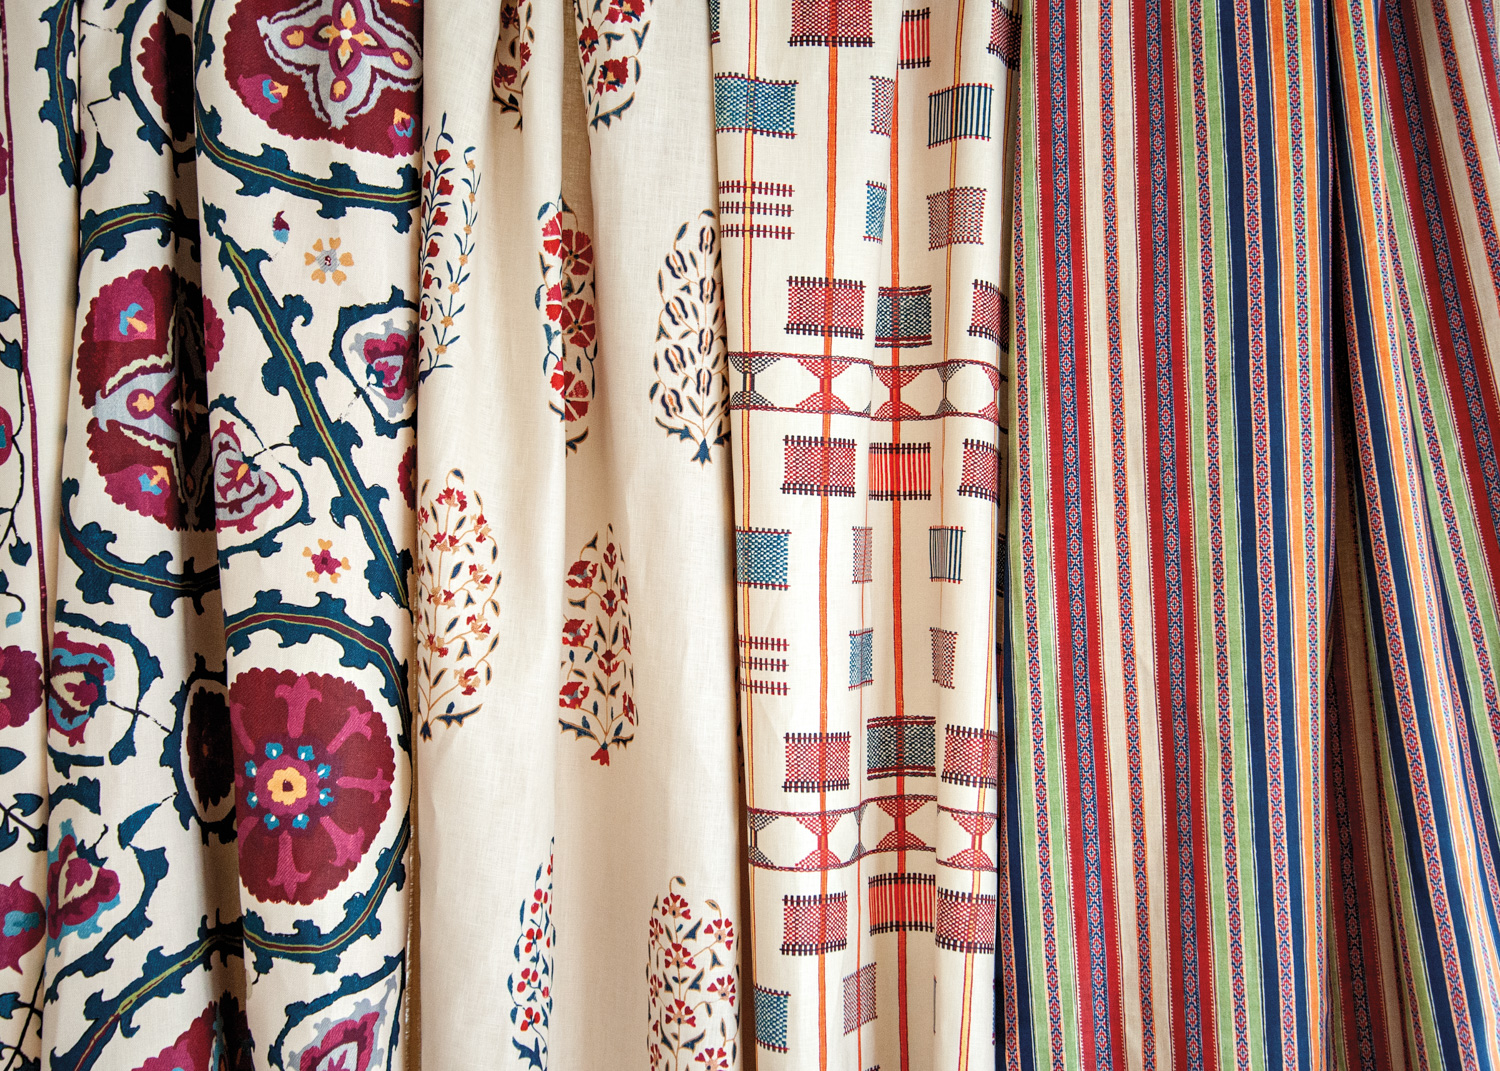 Swaths of textile in various patterns hanging side by side.